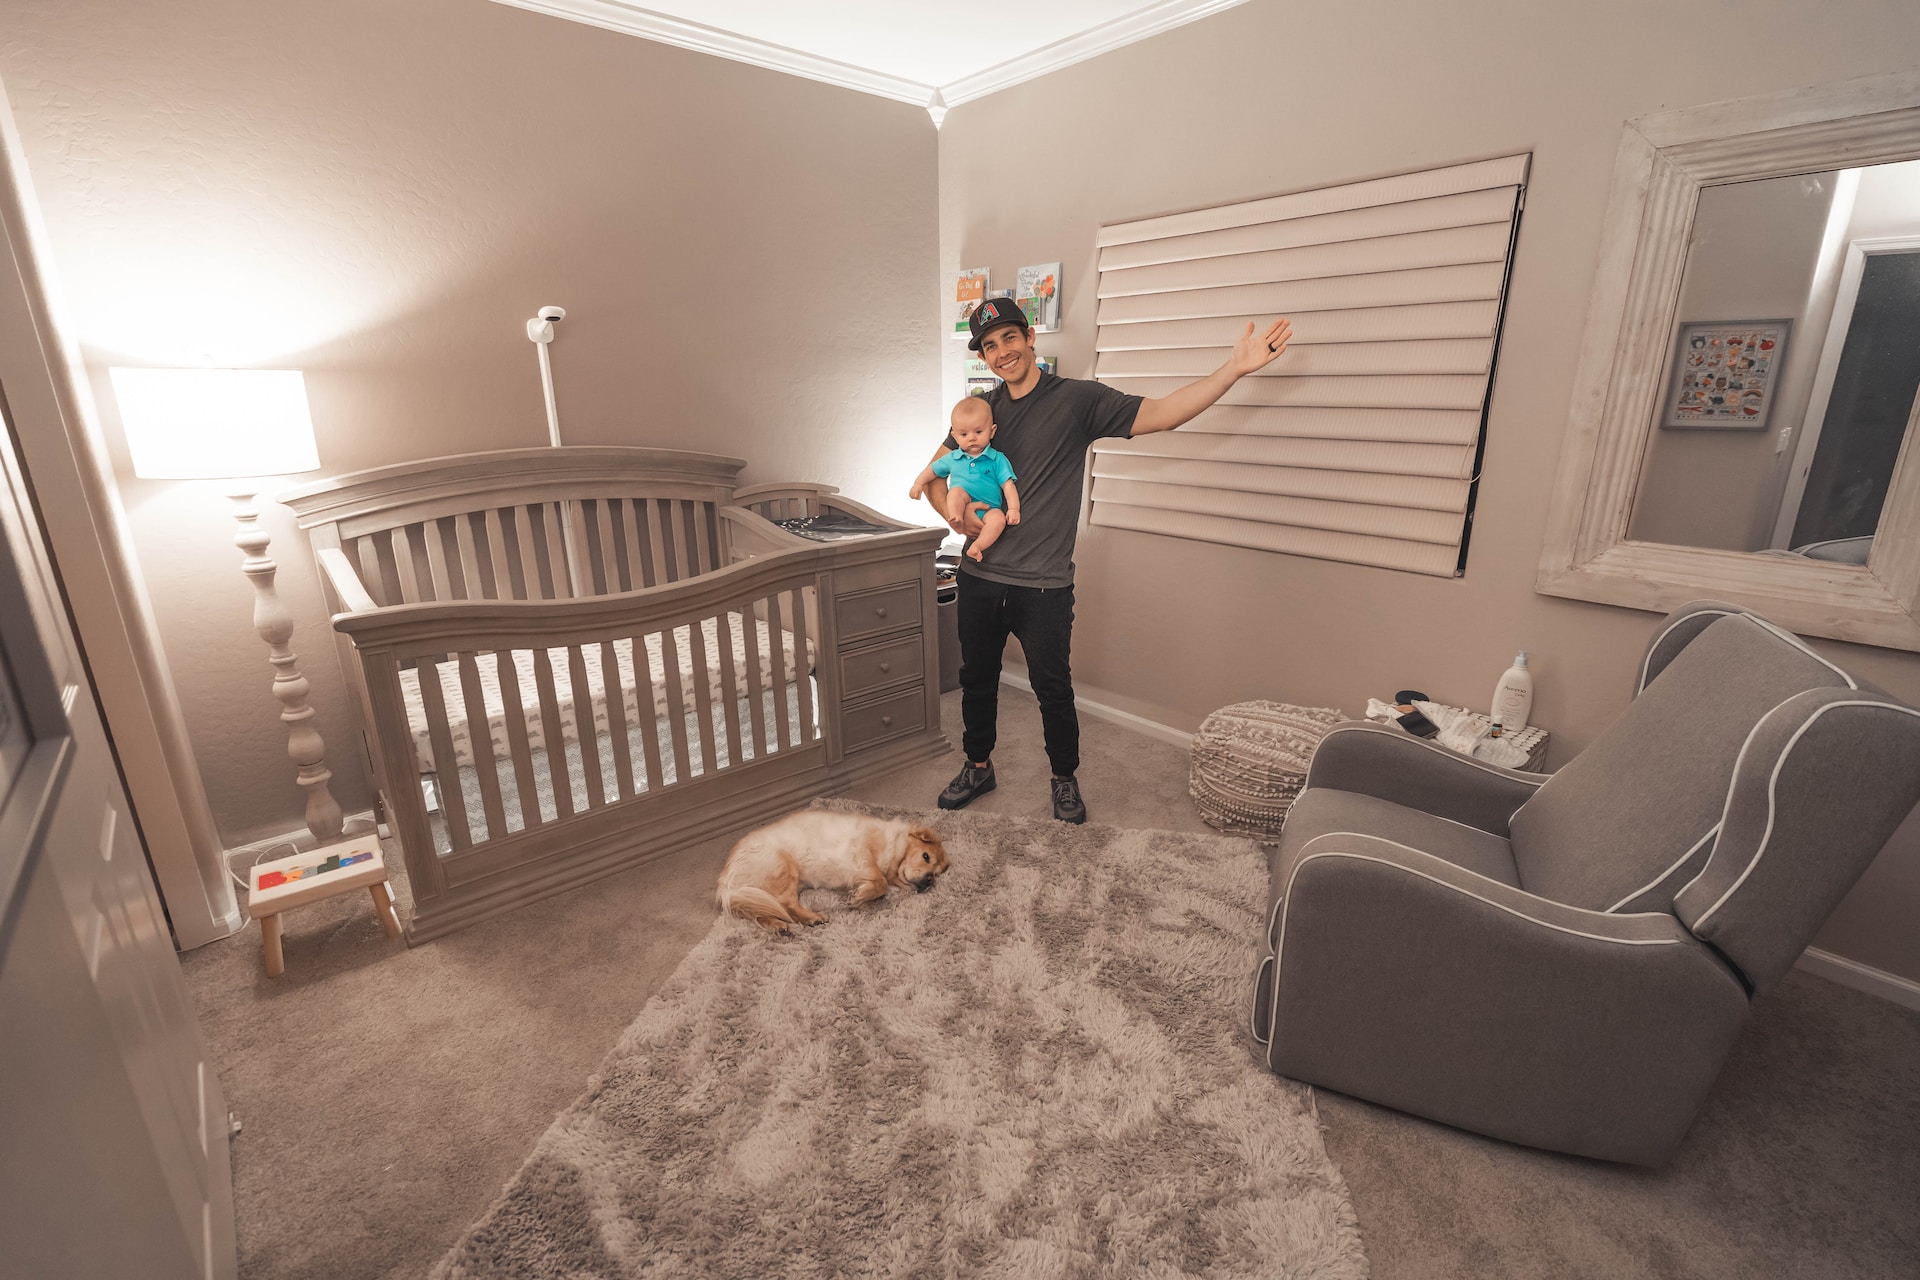 Flooring Considerations for a Baby-Friendly Nursery: Safety, Comfort, and Practicality